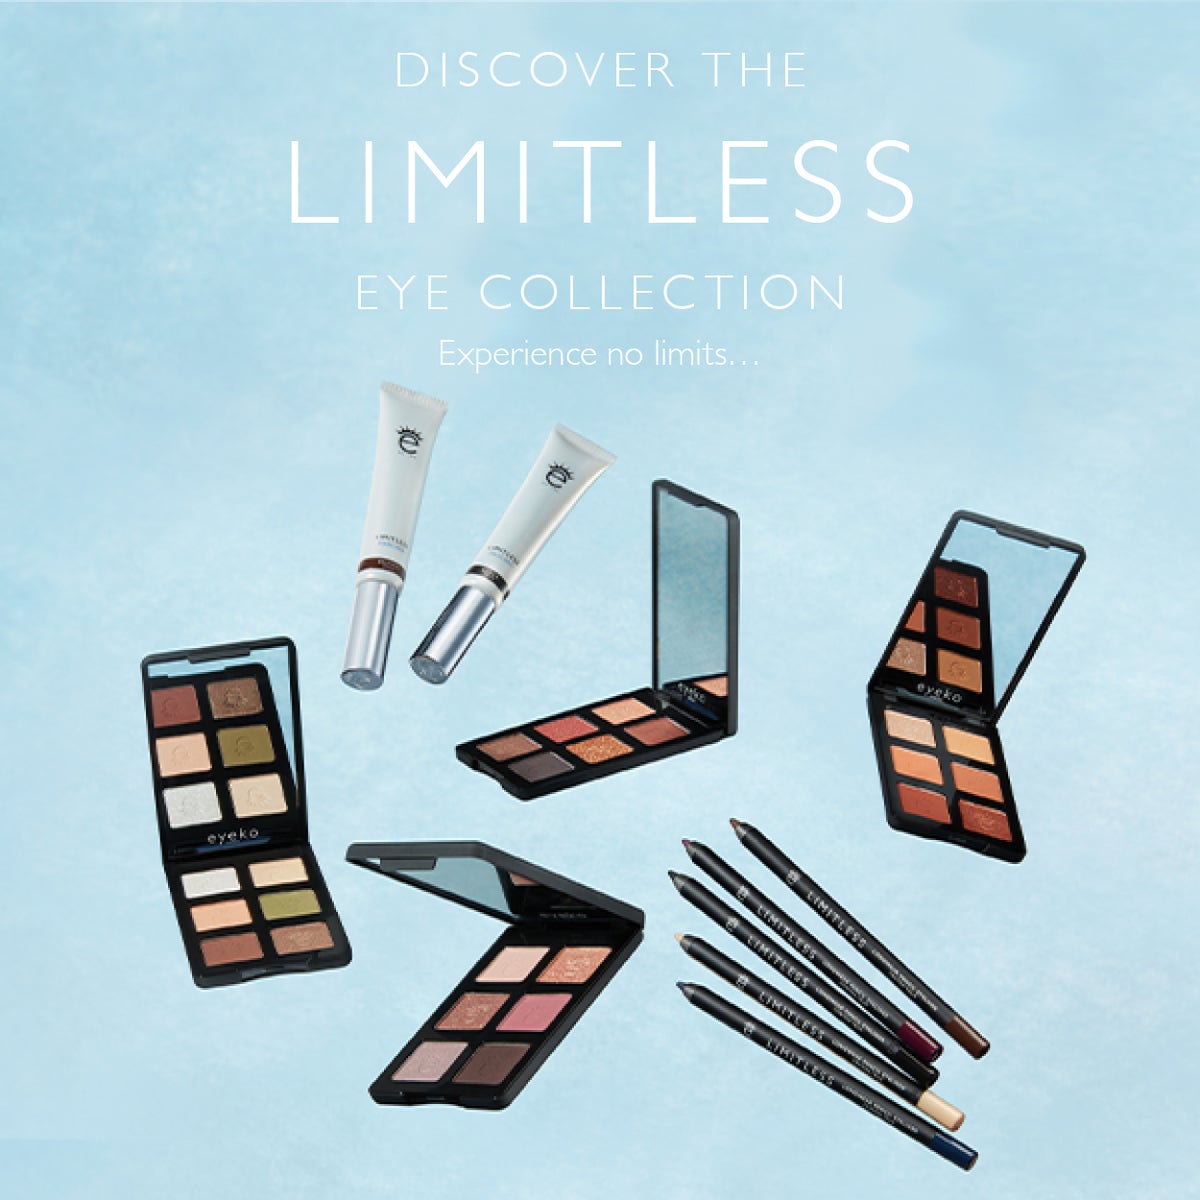 Limitless Eye Collection